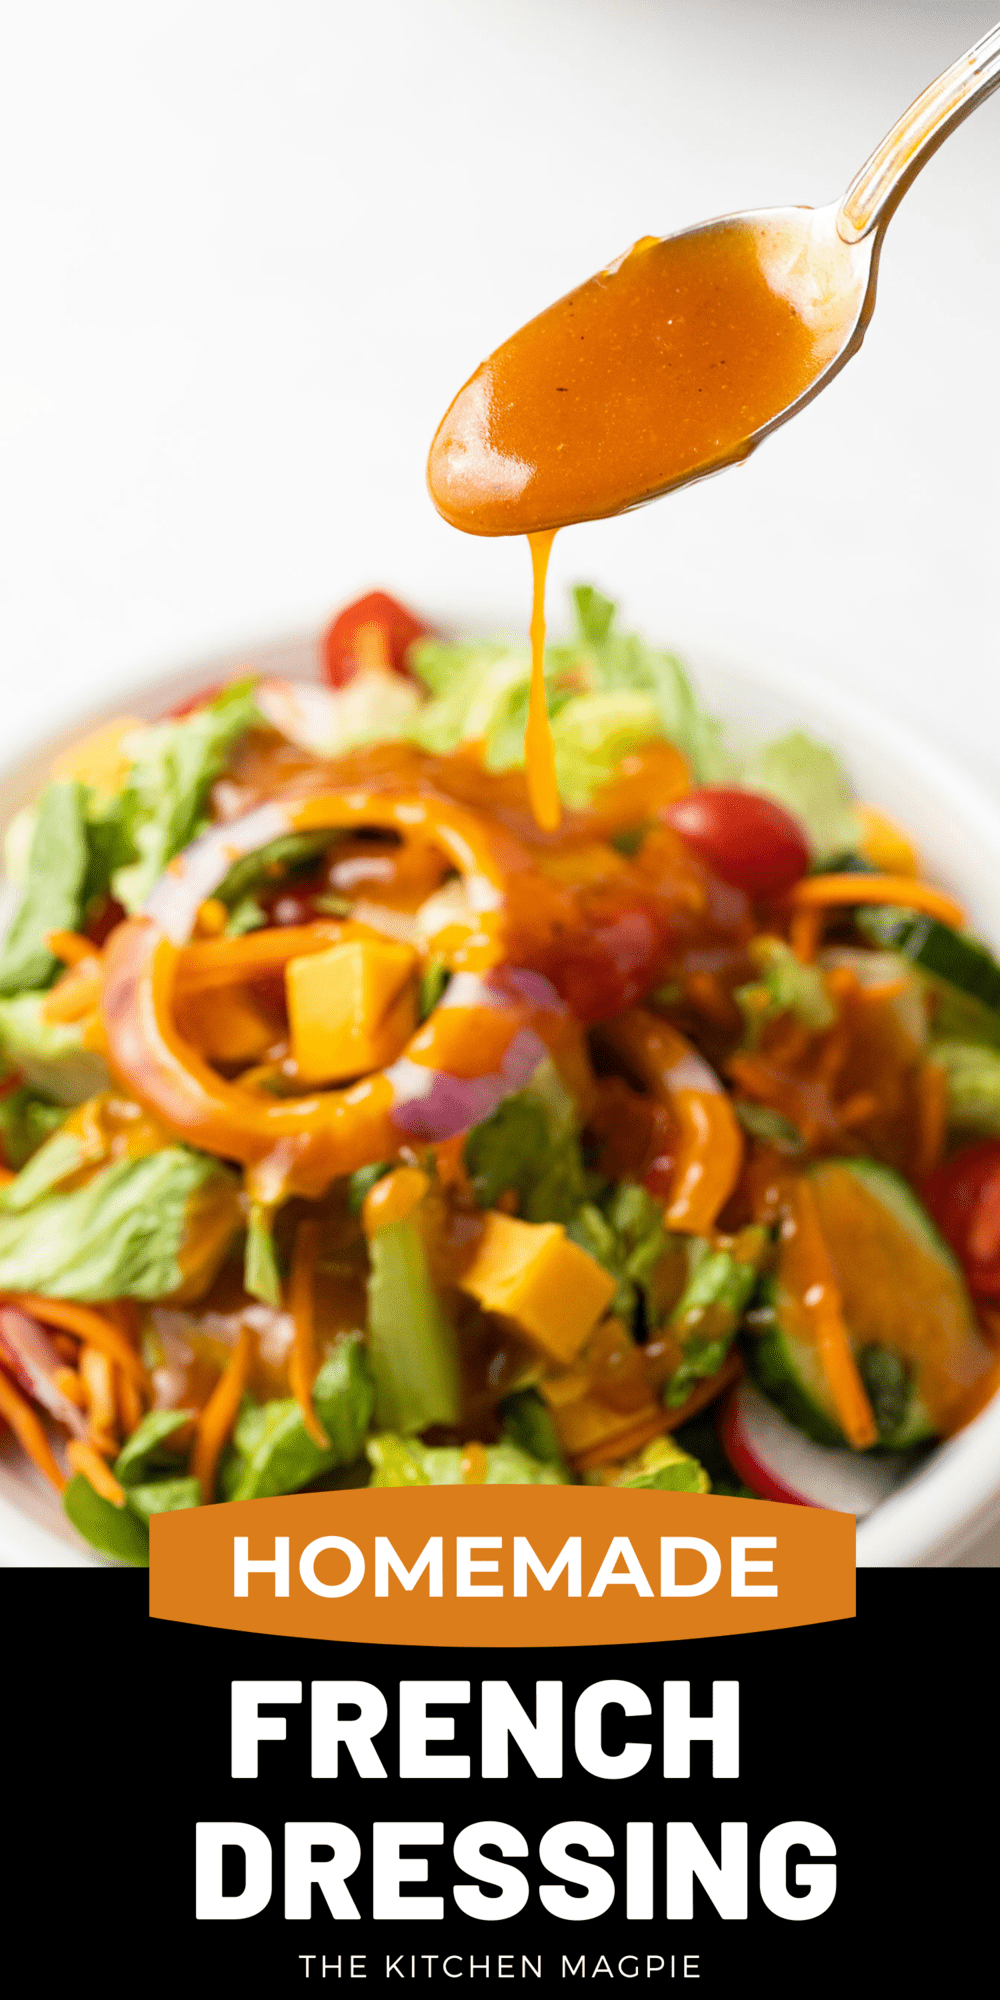 Homemade French dressing is sweet, creamy and tangy, so easy to make and simple to customize the flavor to your individual tastes.